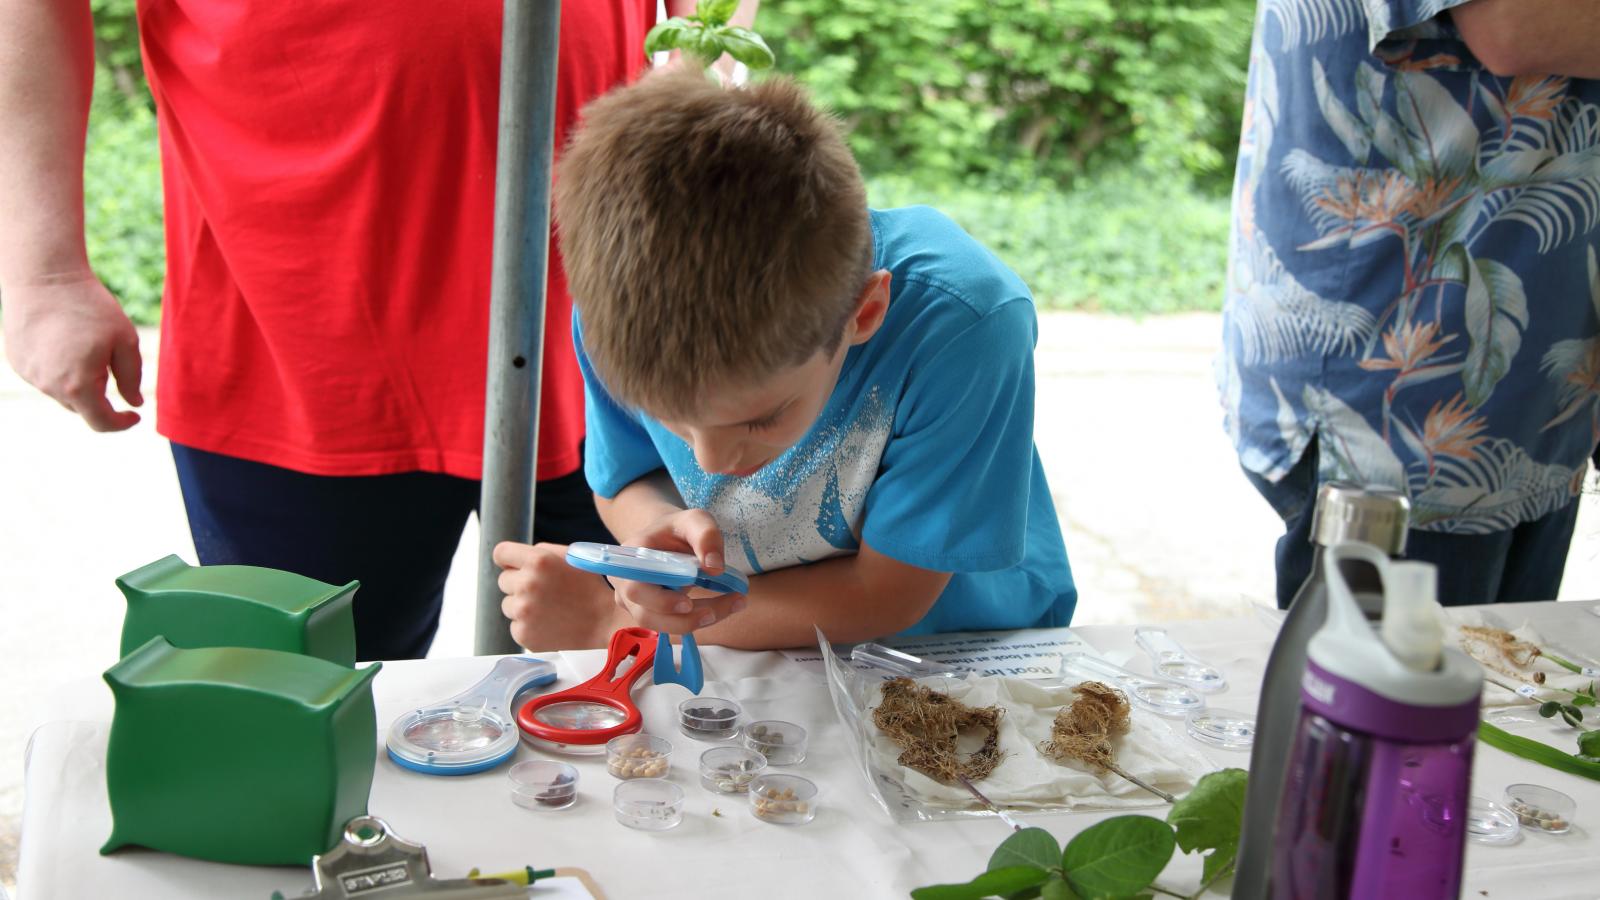 A young person explores plants at WestFest 2018